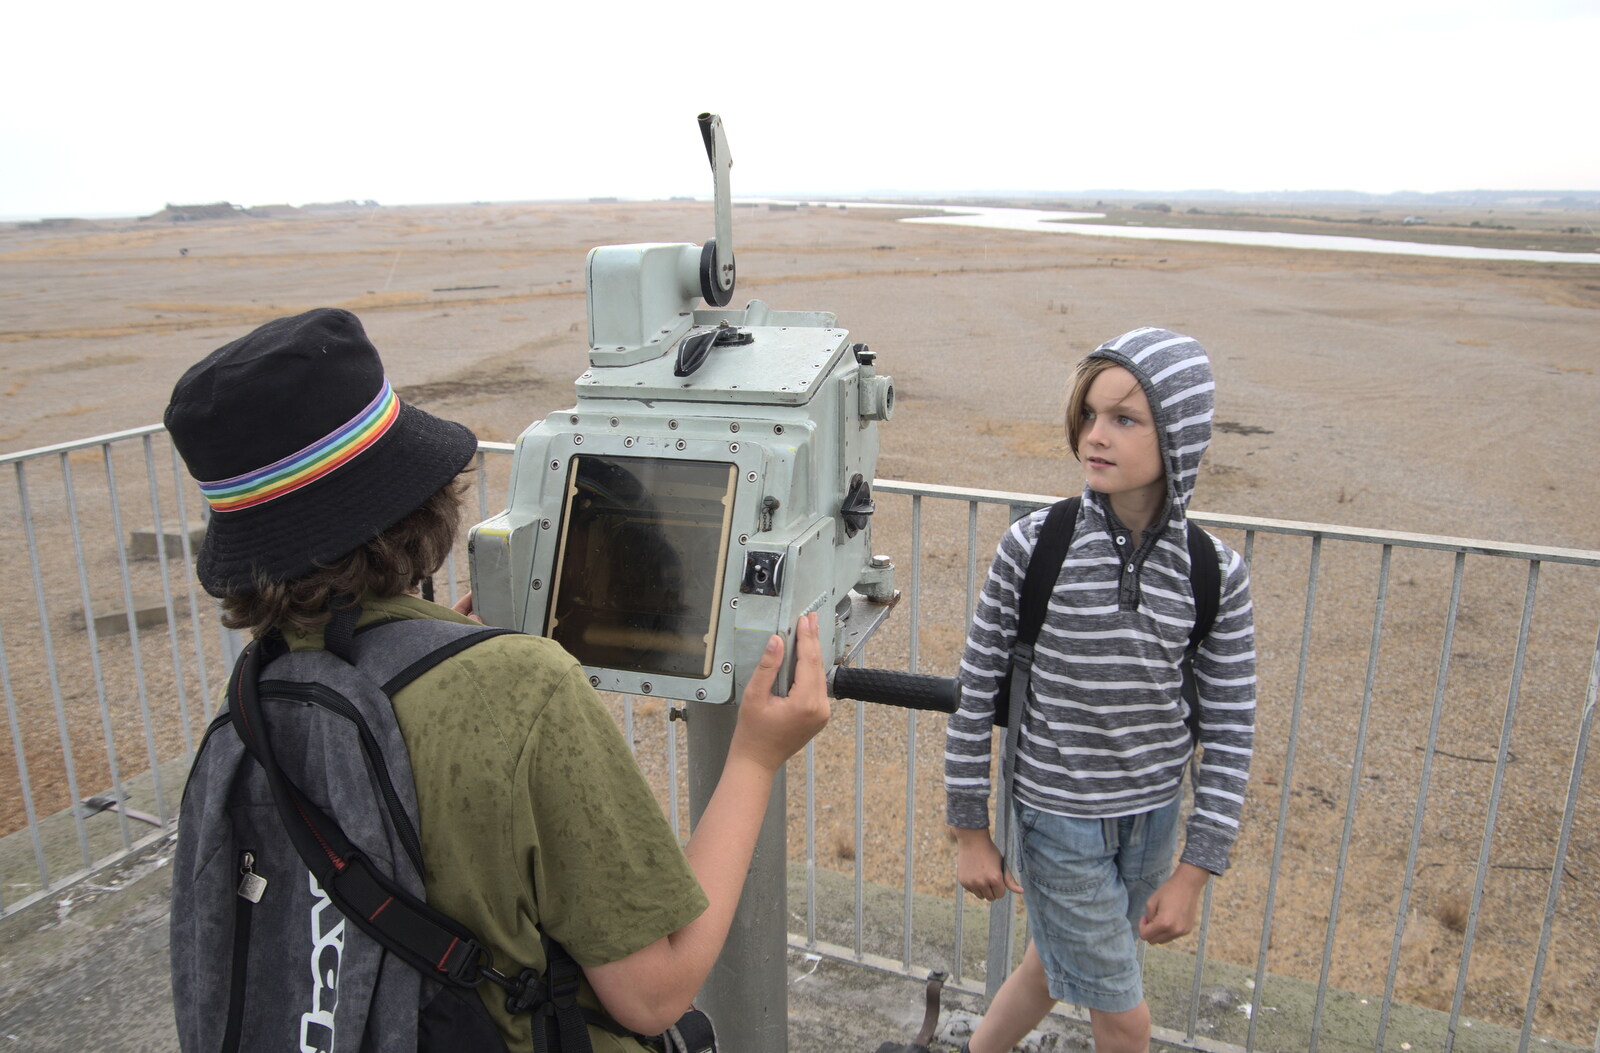 The boys try out some high-quality binoculars from A Trip to Orford Ness, Orford, Suffolk - 16th August 2022